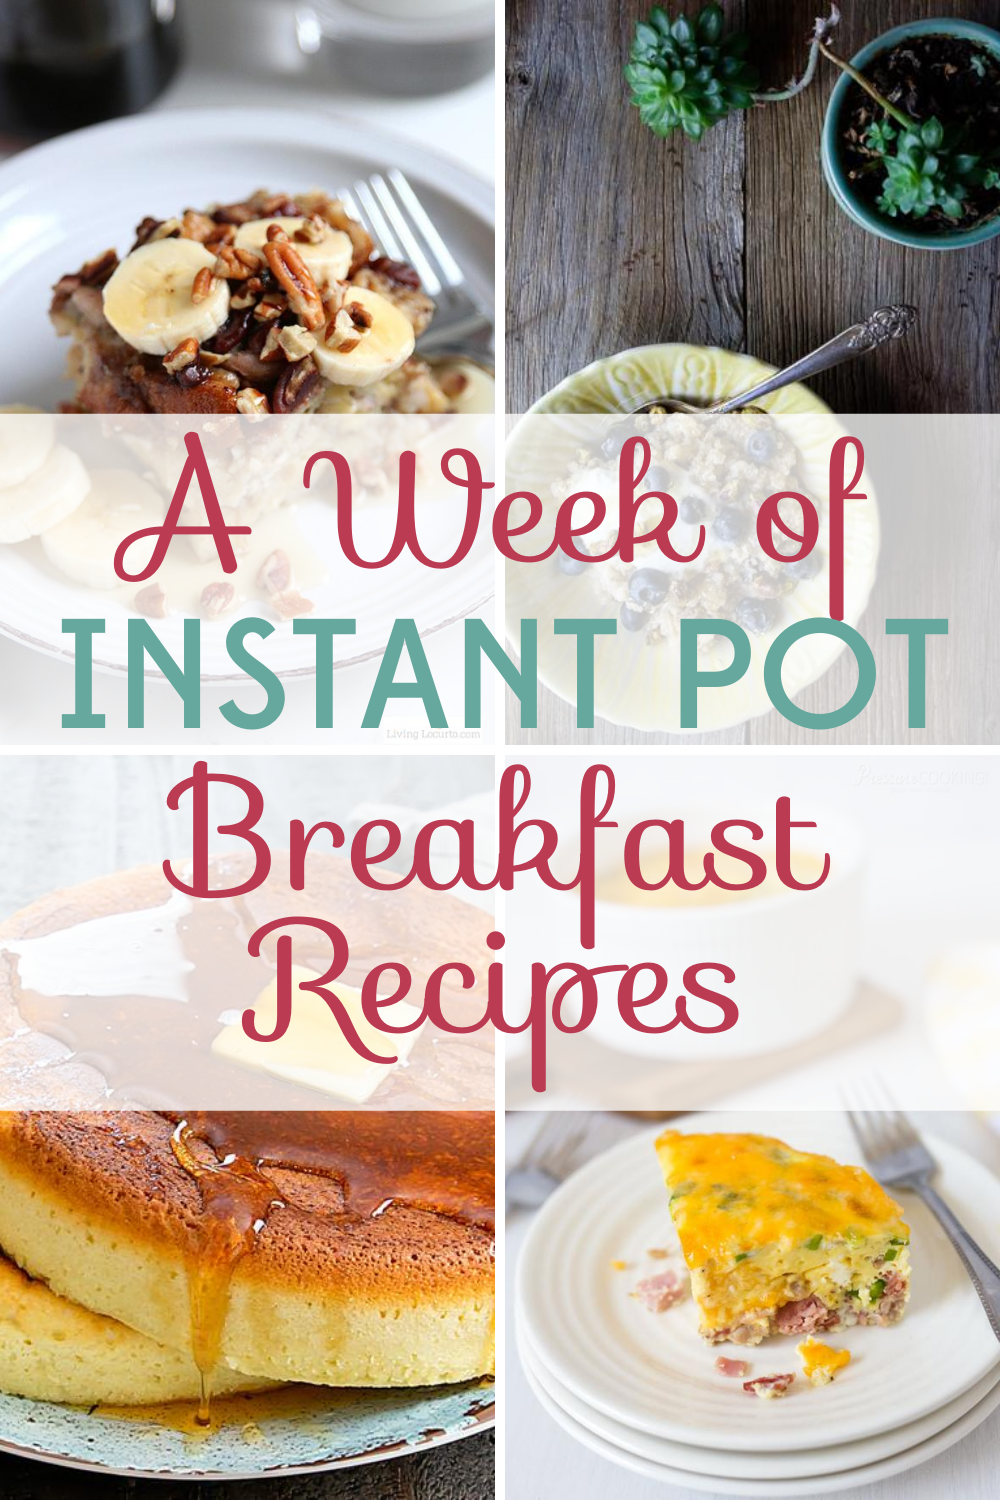 A Week of Instant Pot Breakfast Recipes: Start Your Day Off Right!